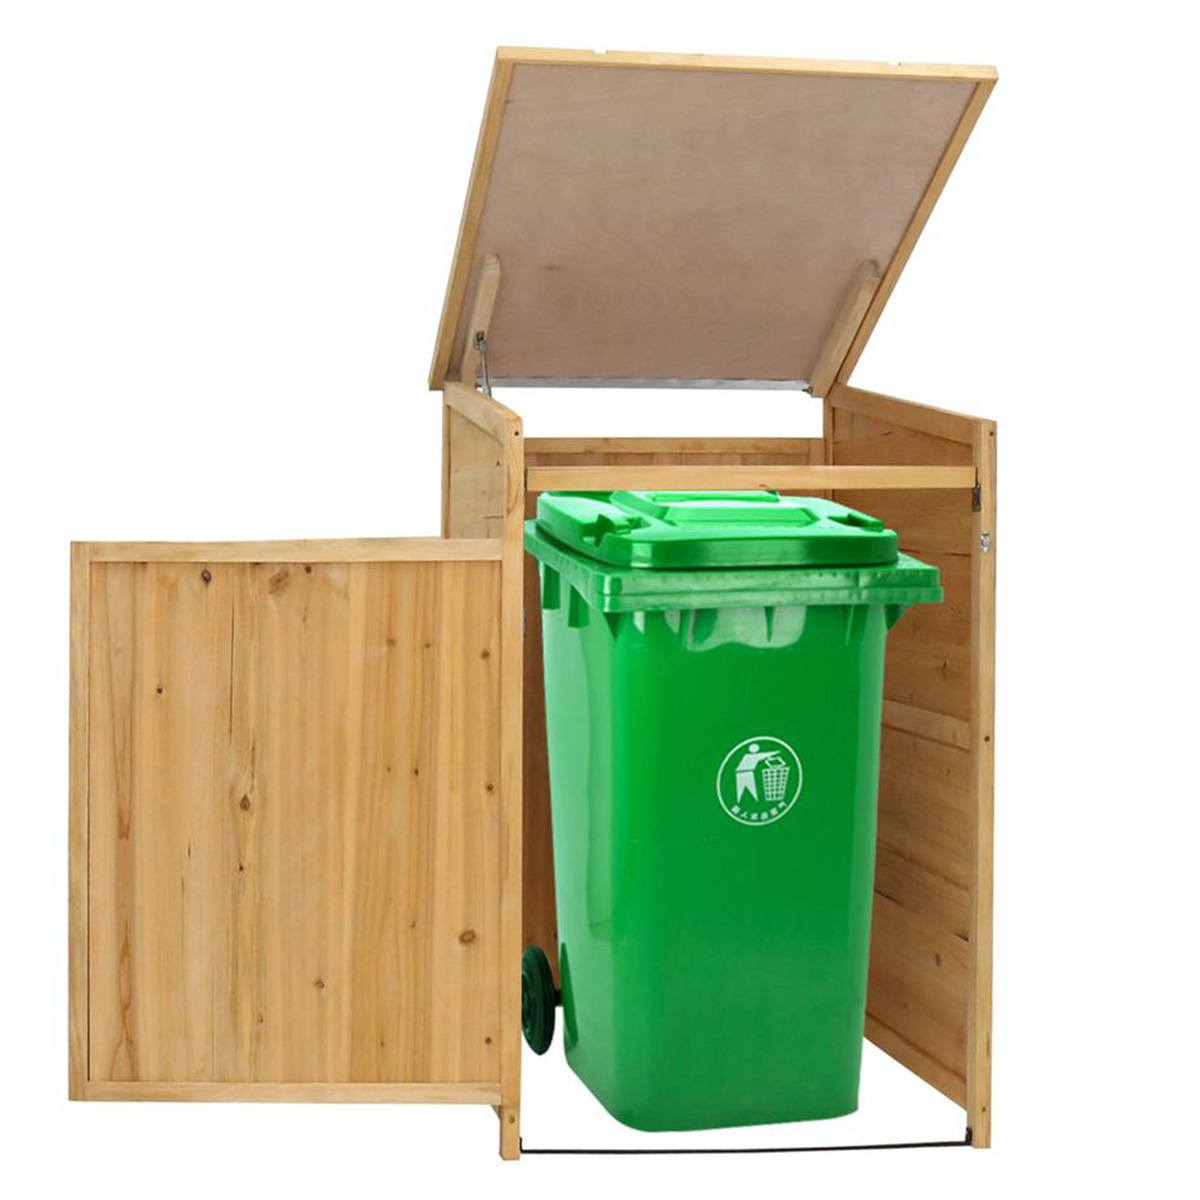 9 Ways To Disguise Your Trash Bin, Outdoor Garbage Can Cabinet Plans